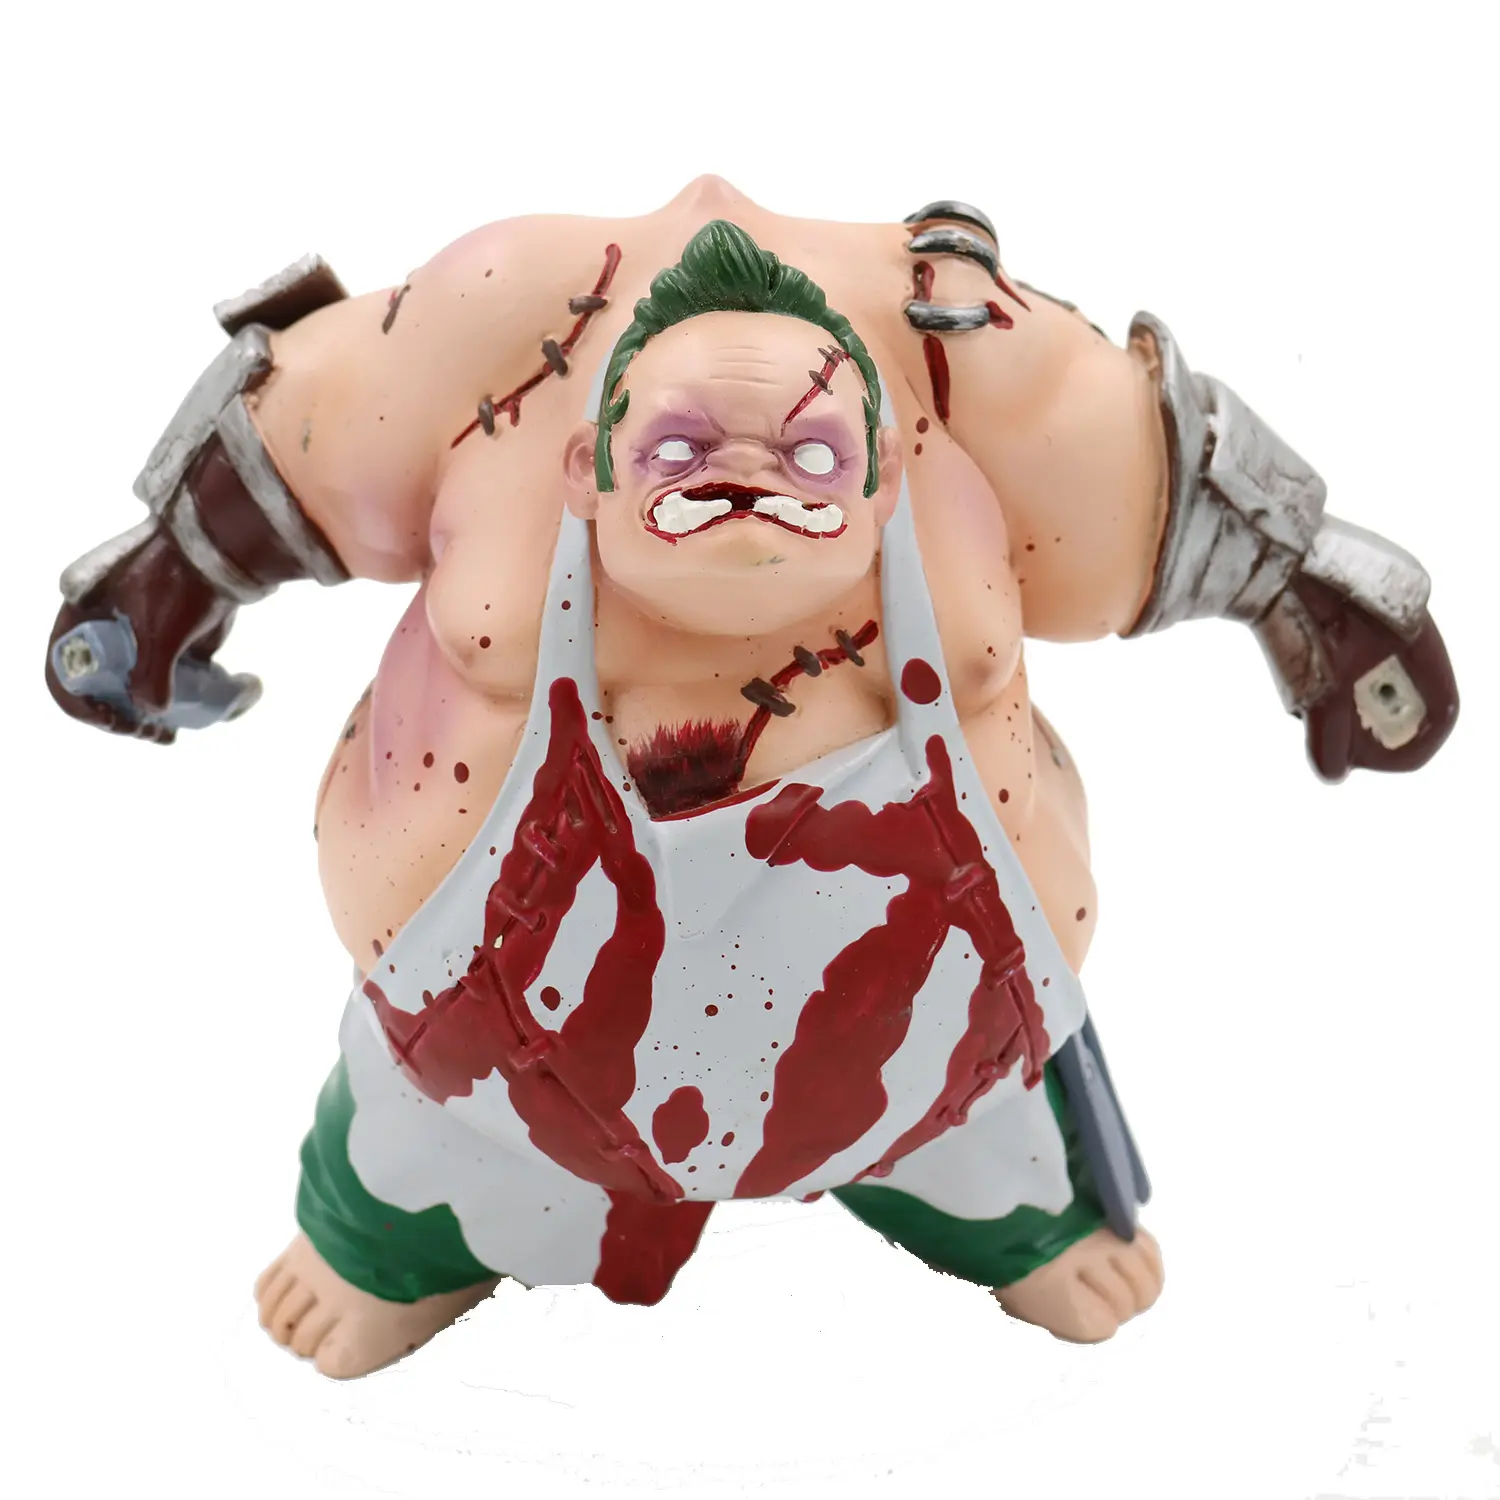 Resin PU High Quality Fat Monster Figure OEM Handmade Art Decoration or Collection Art & Collectible Artificial Model RDRM-0249